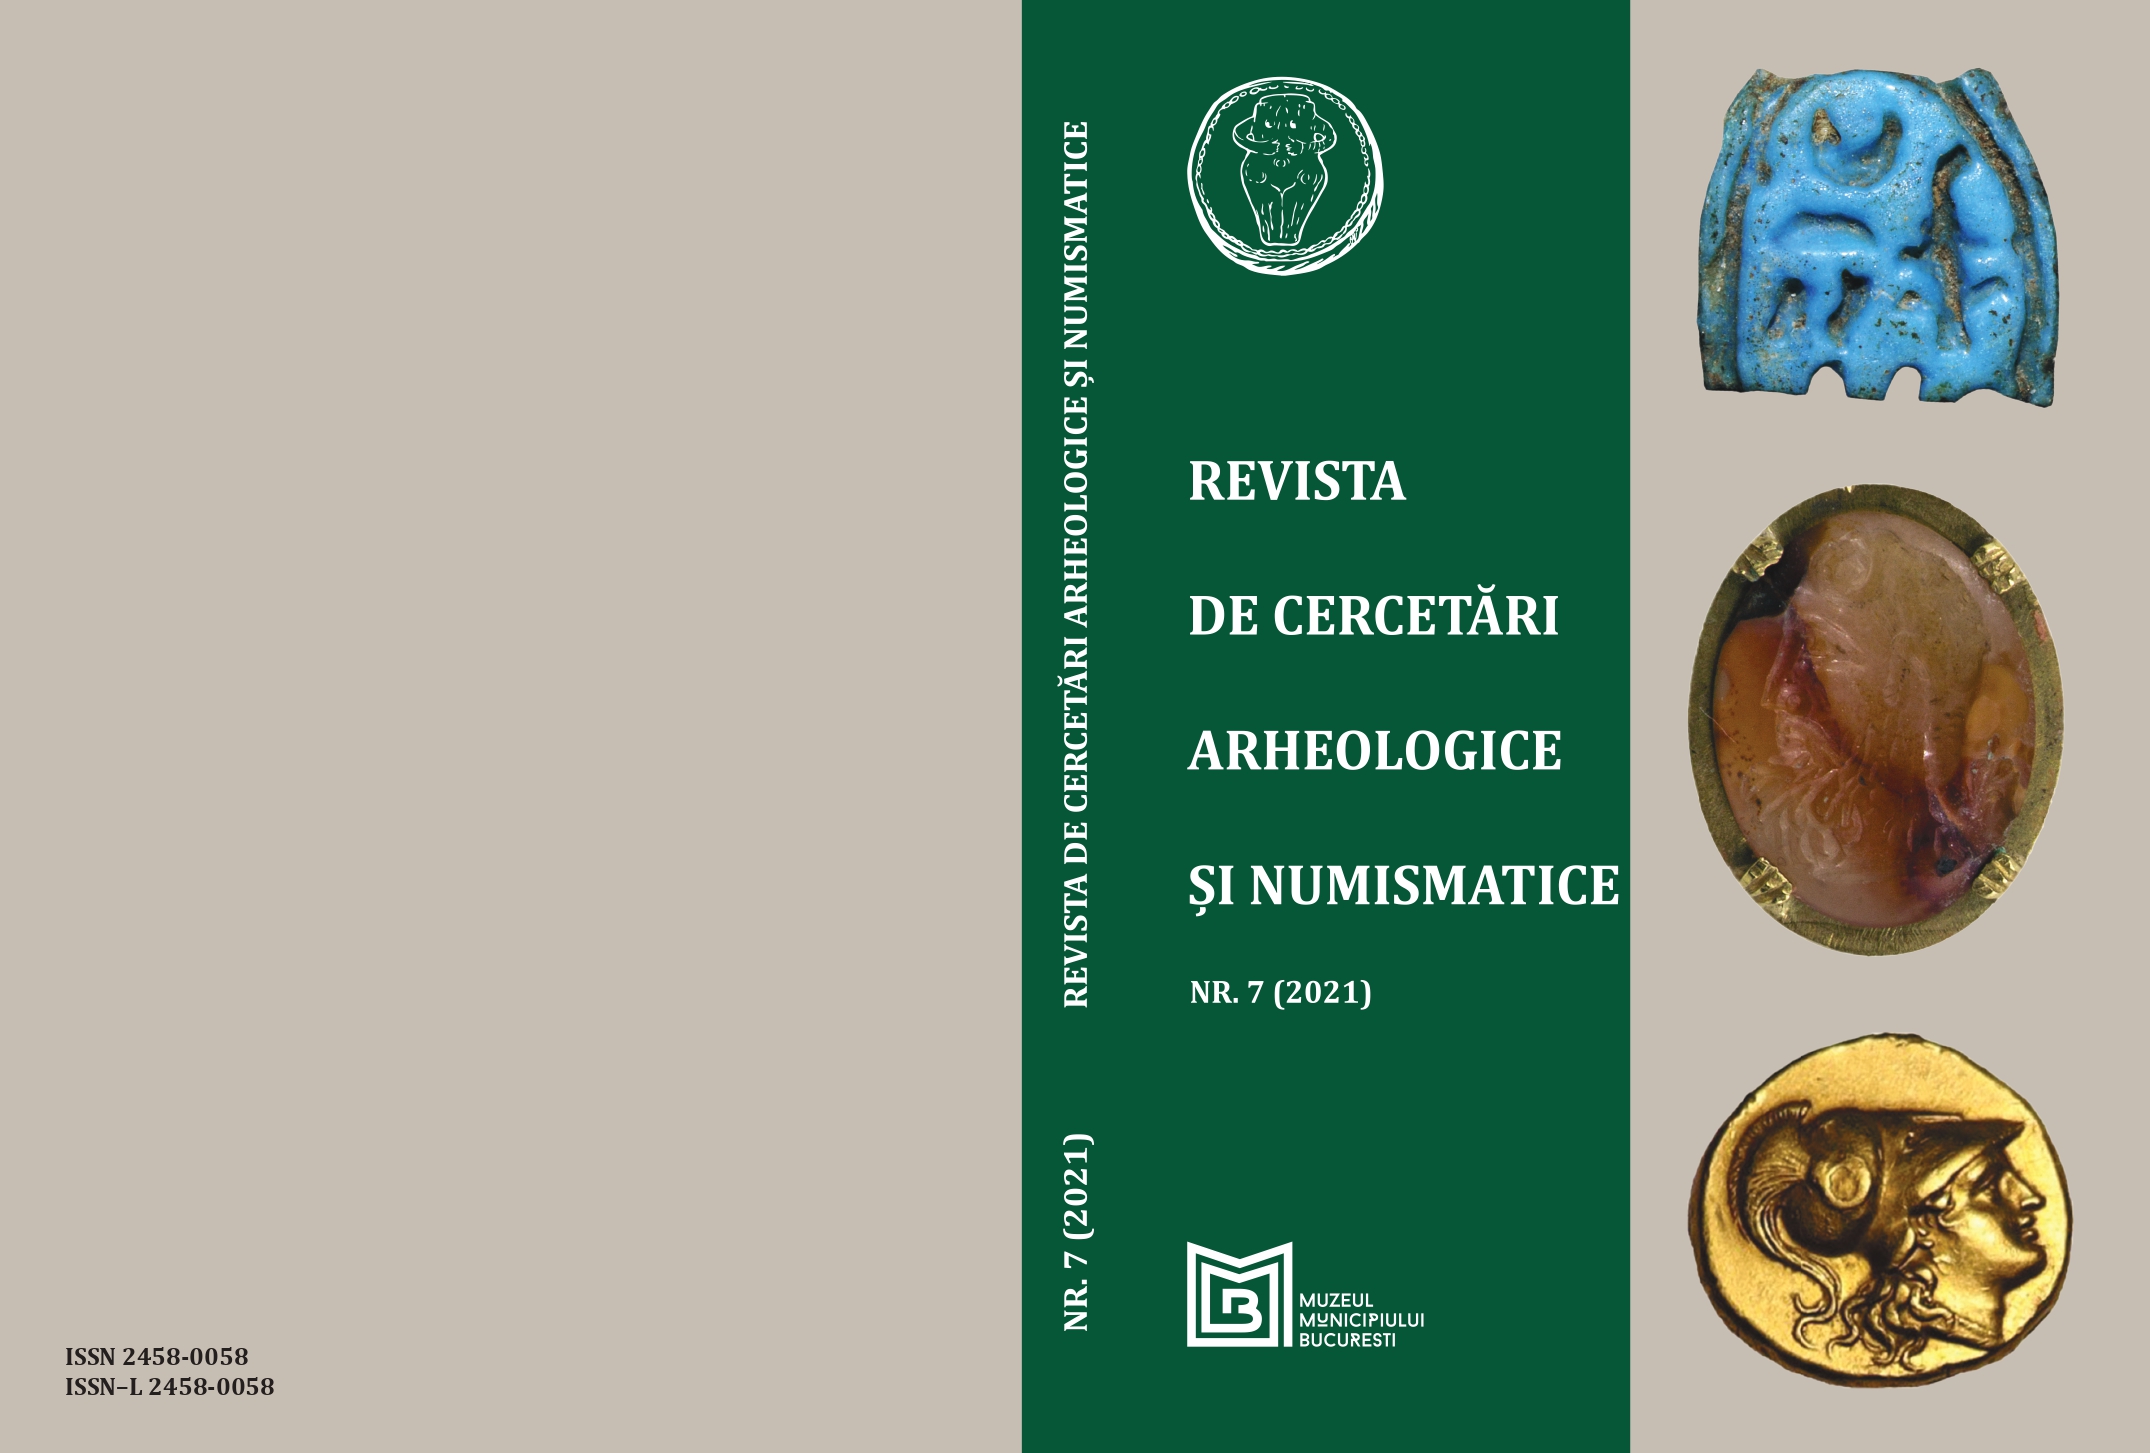 ARCHAEOMETRIC STUDIES ON EGYPTIAN OBJECTS FROM THE “MARIA AND DR. GEORGE SEVEREANU” COLLECTION